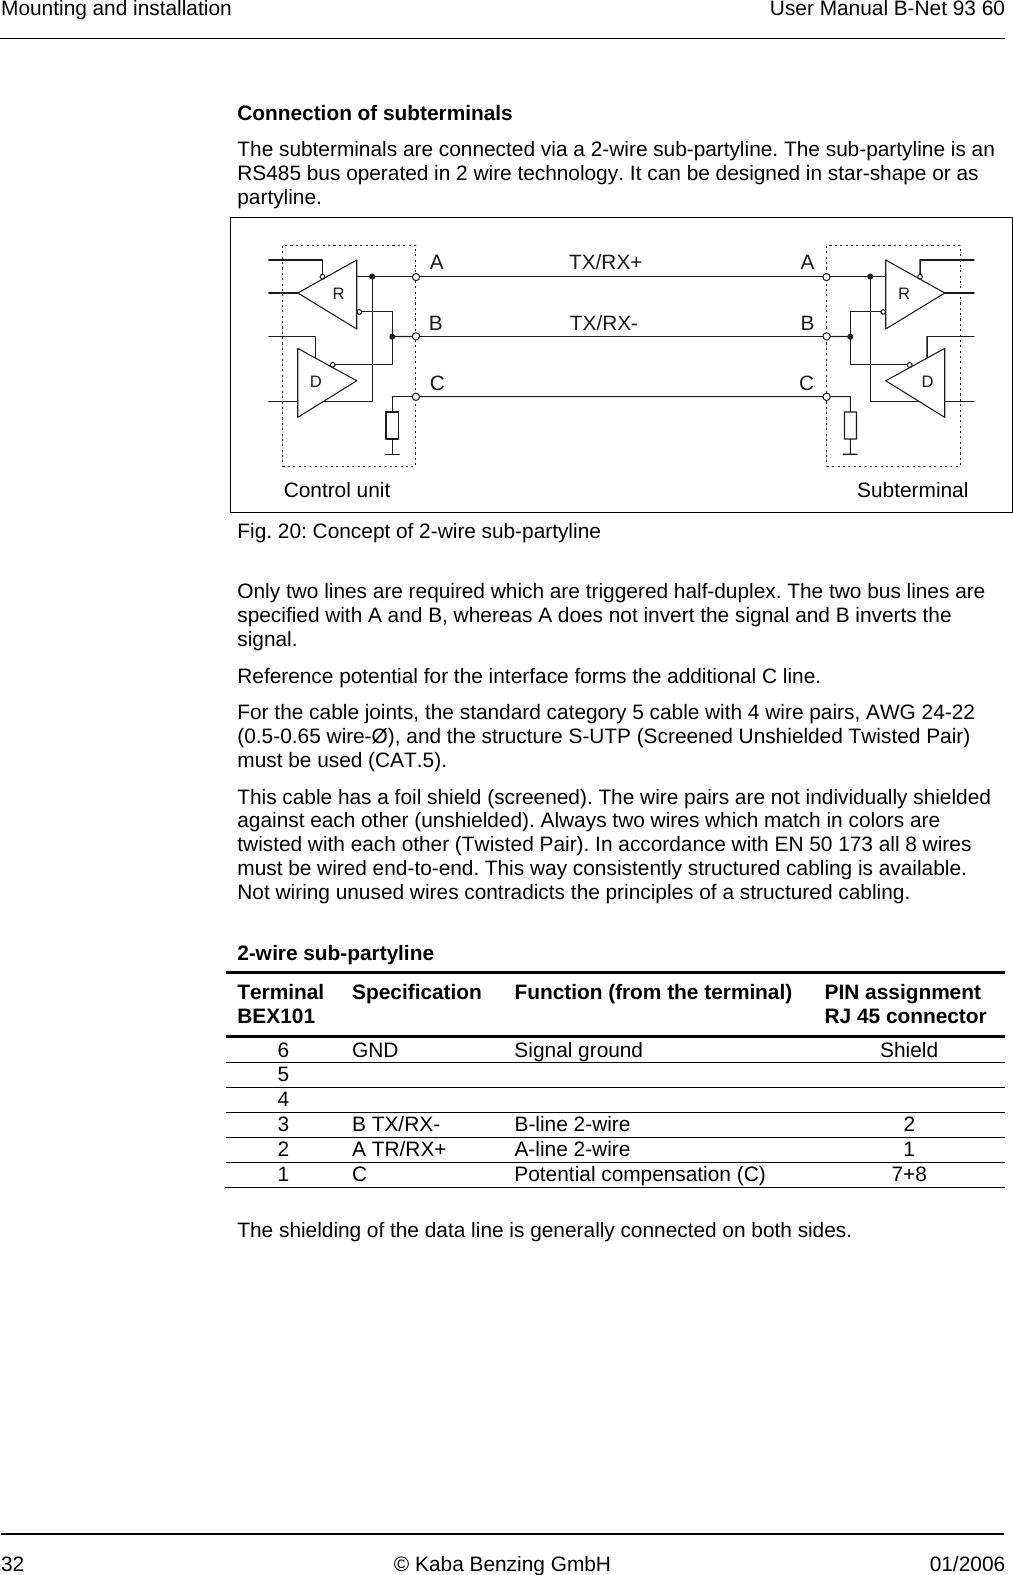 Mounting and installation  User Manual B-Net 93 60 32  © Kaba Benzing GmbH  01/2006    Connection of subterminals The subterminals are connected via a 2-wire sub-partyline. The sub-partyline is an RS485 bus operated in 2 wire technology. It can be designed in star-shape or as partyline.   ATX/RX-ABBTX/RX+DRCCDR Control unit    Subterminal Fig. 20: Concept of 2-wire sub-partyline  Only two lines are required which are triggered half-duplex. The two bus lines are specified with A and B, whereas A does not invert the signal and B inverts the signal. Reference potential for the interface forms the additional C line. For the cable joints, the standard category 5 cable with 4 wire pairs, AWG 24-22 (0.5-0.65 wire-Ø), and the structure S-UTP (Screened Unshielded Twisted Pair) must be used (CAT.5). This cable has a foil shield (screened). The wire pairs are not individually shielded against each other (unshielded). Always two wires which match in colors are twisted with each other (Twisted Pair). In accordance with EN 50 173 all 8 wires must be wired end-to-end. This way consistently structured cabling is available. Not wiring unused wires contradicts the principles of a structured cabling.  2-wire sub-partyline Terminal BEX101  Specification Function (from the terminal)  PIN assignment RJ 45 connector 6 GND  Signal ground  Shield 5      4      3  B TX/RX-  B-line 2-wire  2 2  A TR/RX+  A-line 2-wire  1 1  C  Potential compensation (C)  7+8  The shielding of the data line is generally connected on both sides. 